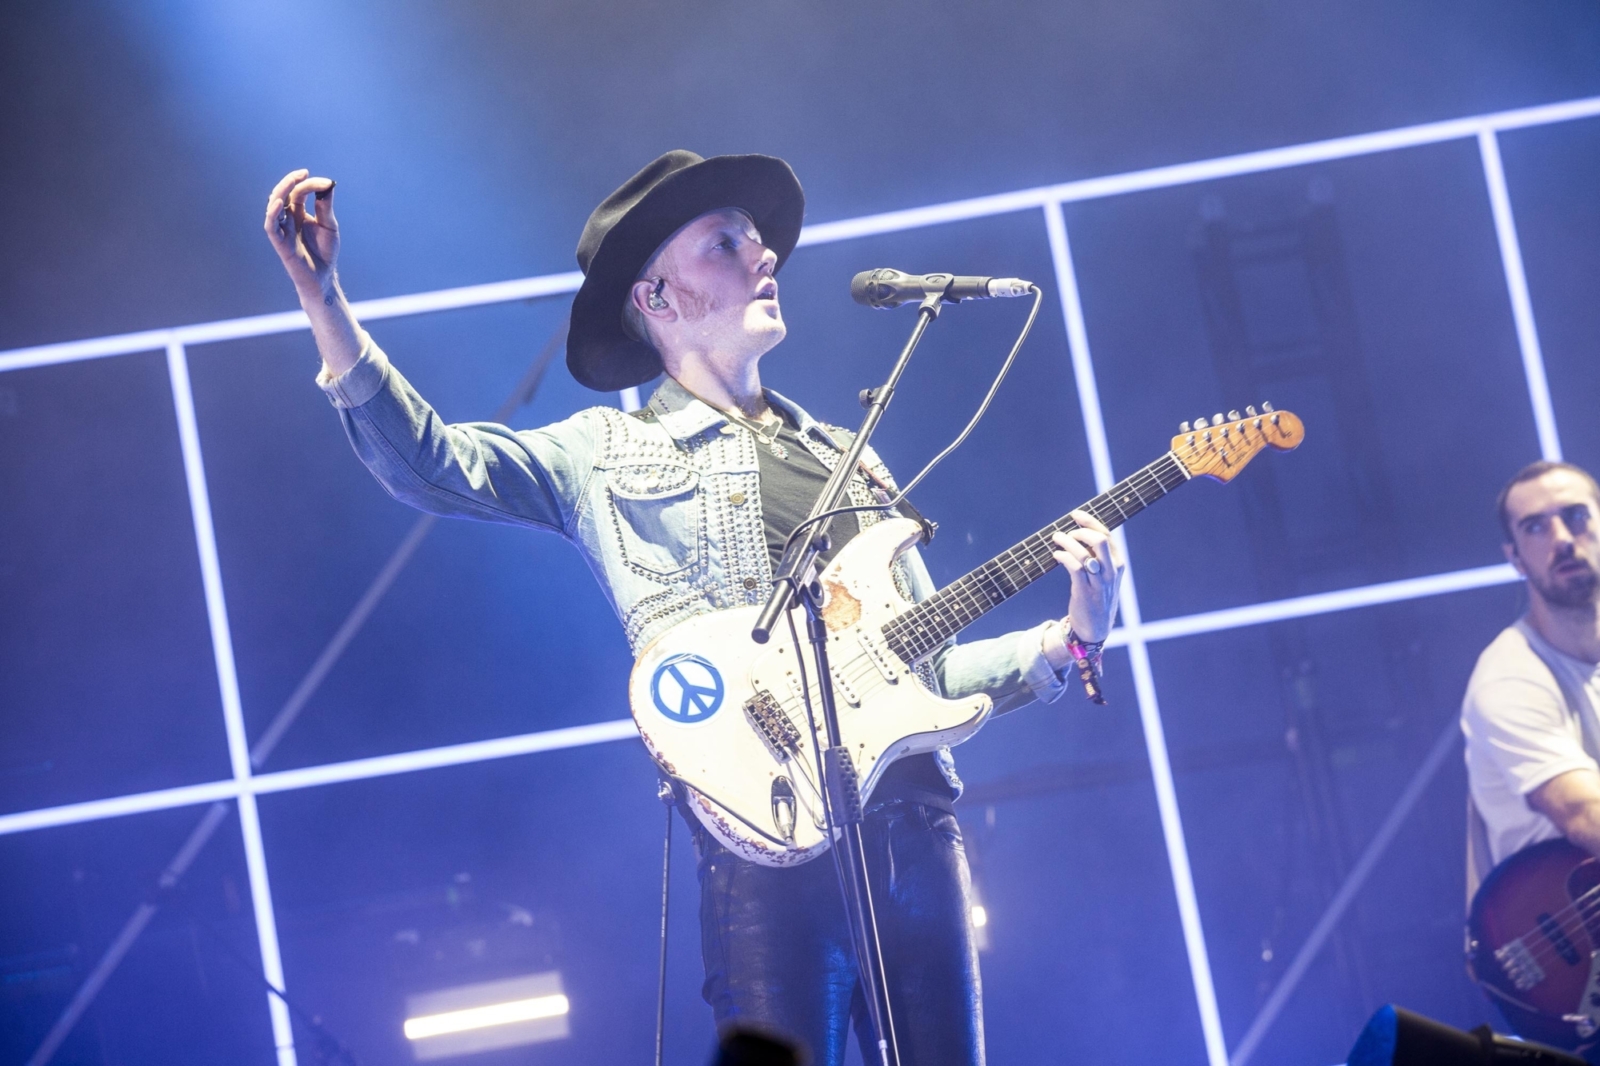 Two Door Cinema Club, J Hus, Pale Waves and more kick off Benicassim 2018